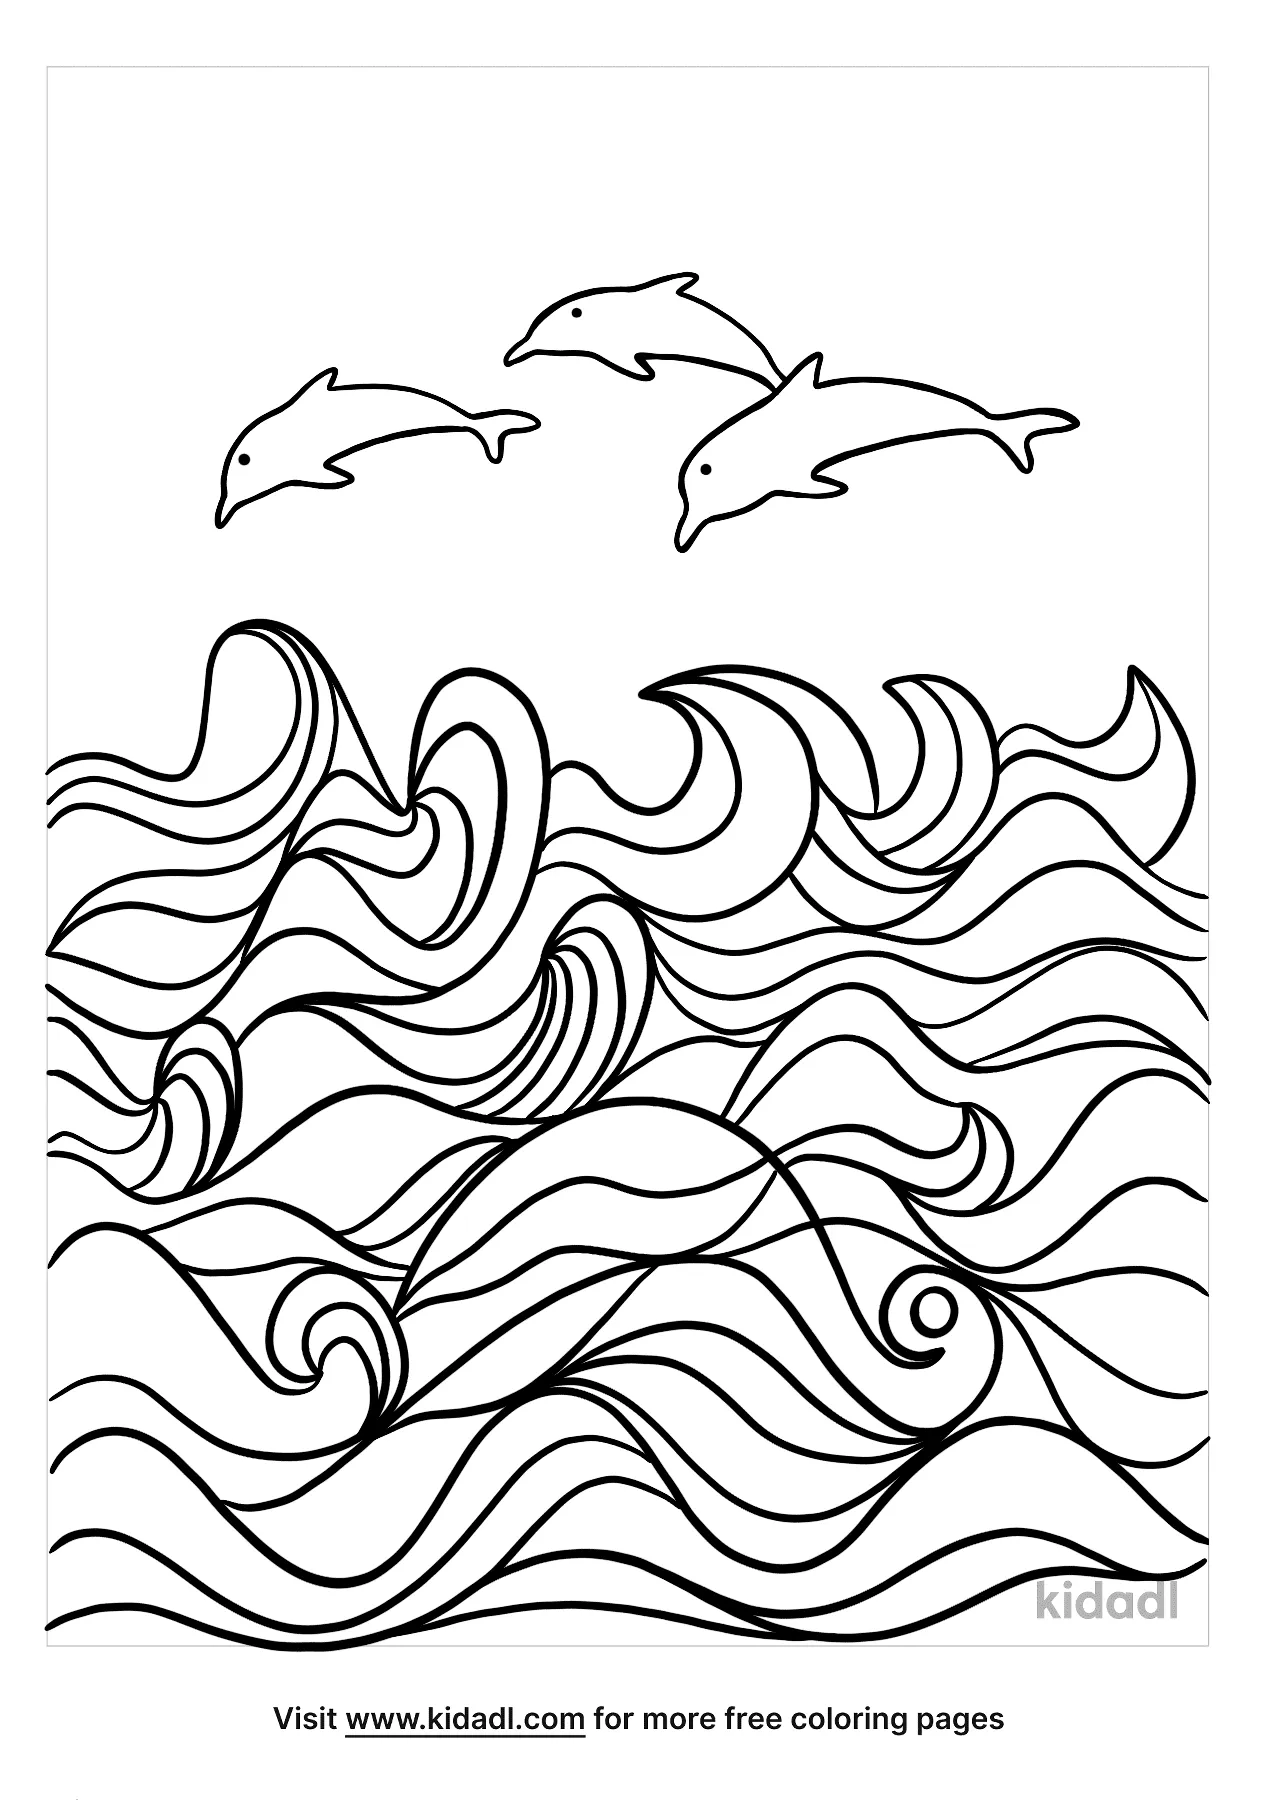 41+ fresh pics Adult Coloring Page Ocean Waves - Zentangle Dolphin With